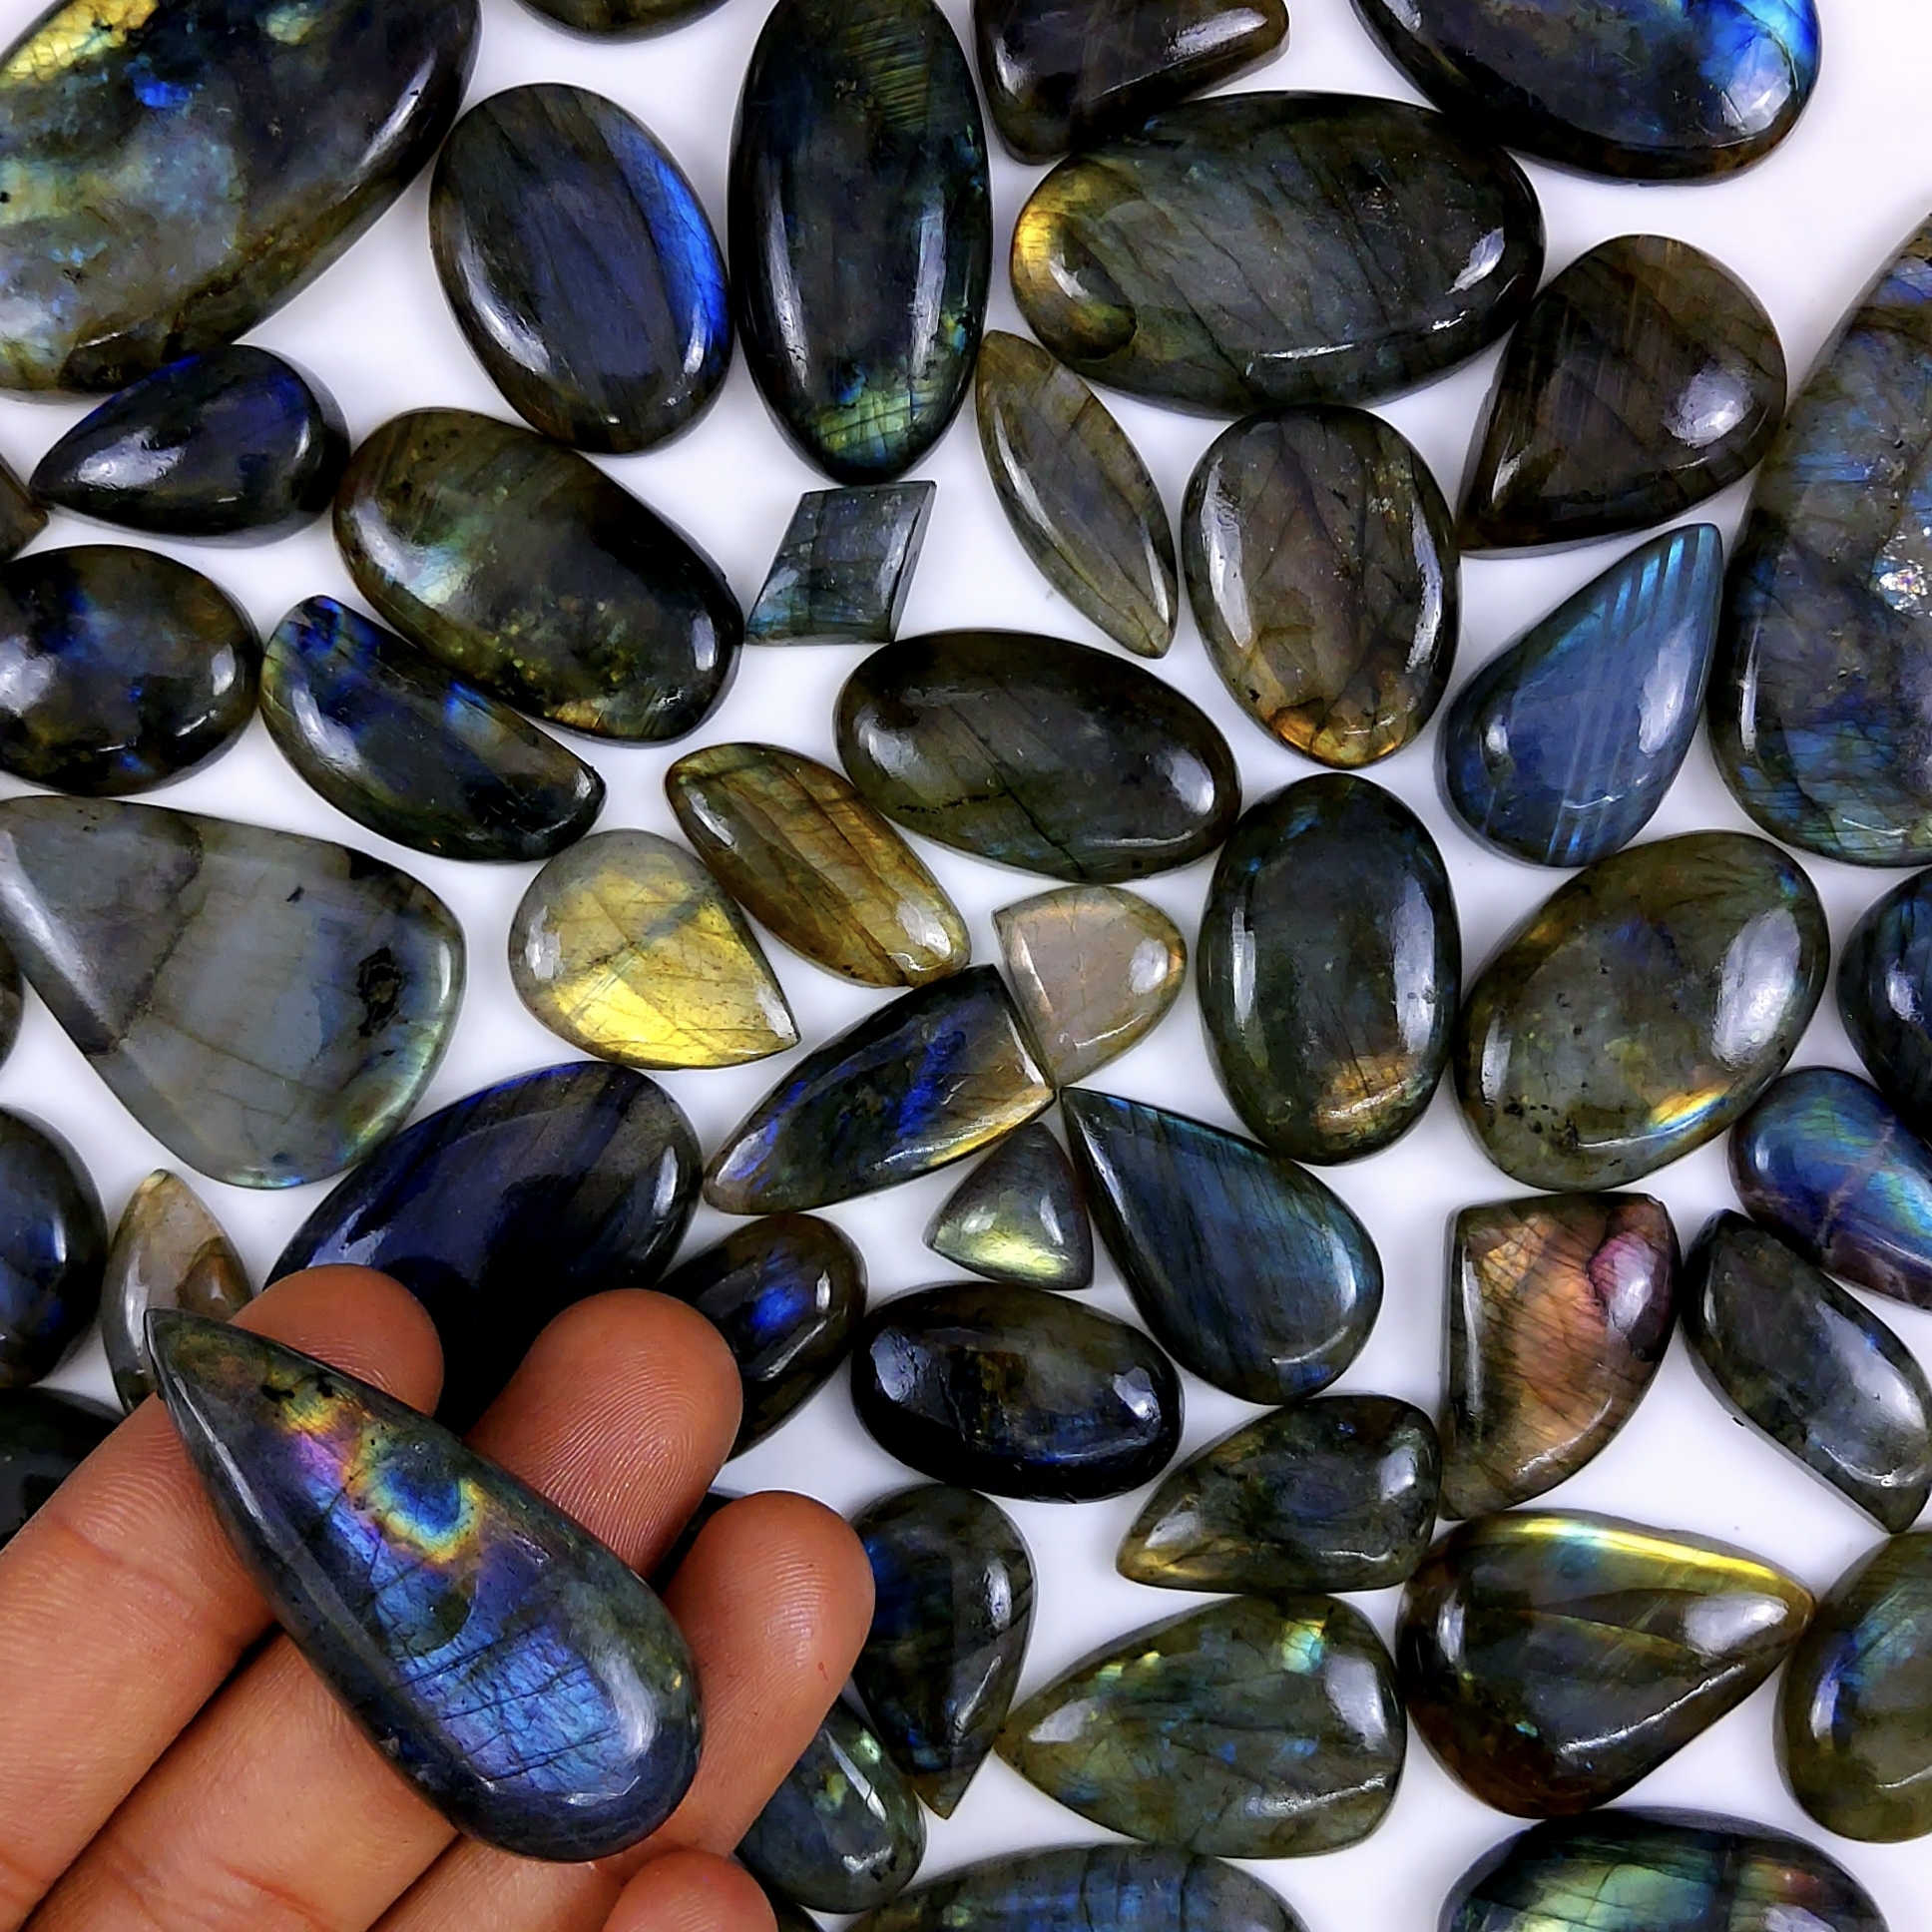 47pc 1839Cts Labradorite Cabochon Multifire Healing Crystal For Jewelry Supplies, Labradorite Necklace Handmade Wire Wrapped Gemstone Pendant 50x30 16x12mm#6345